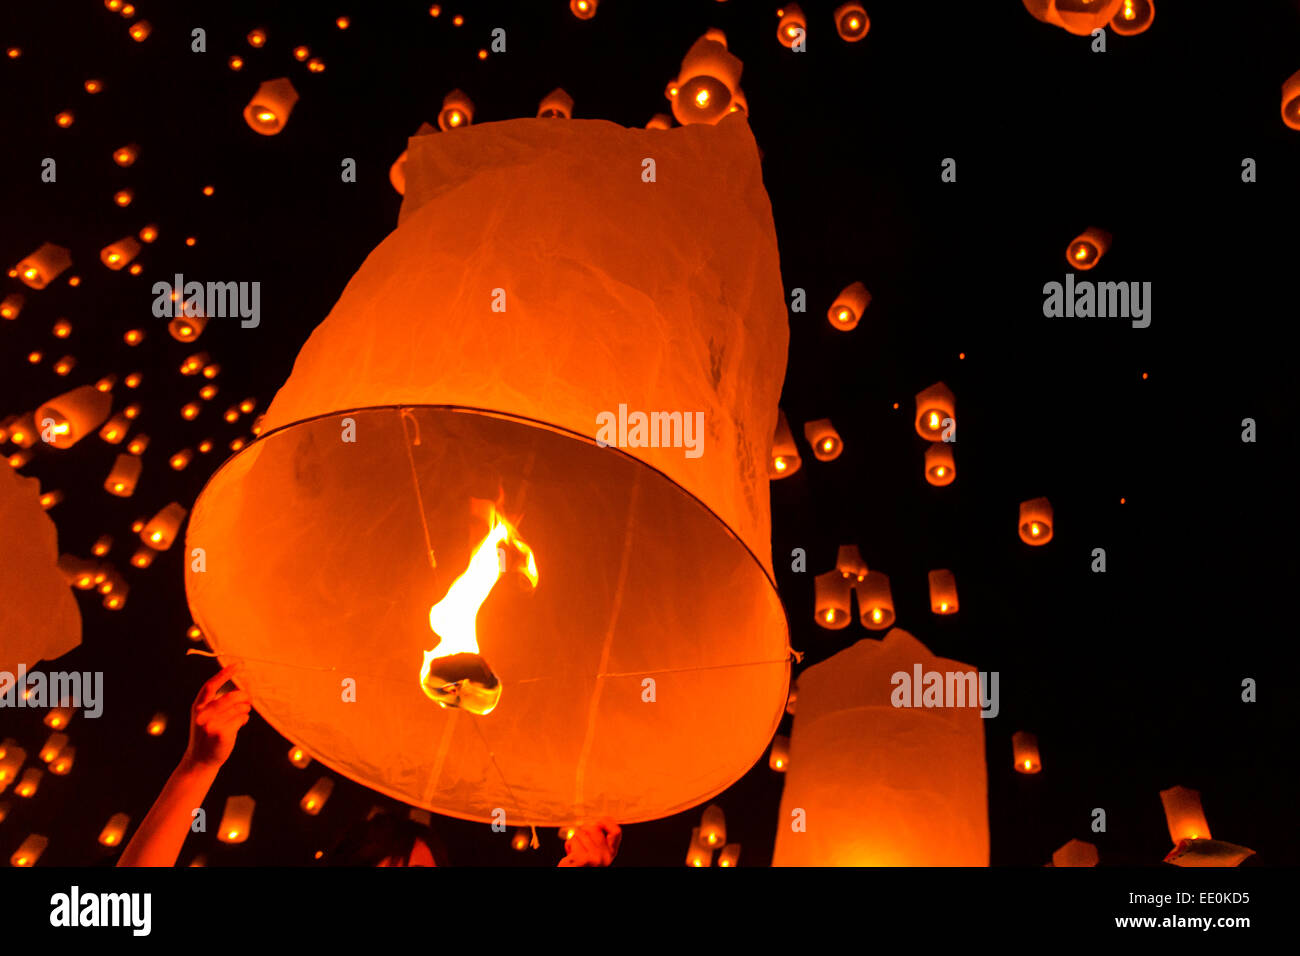 Releasing the lighted paper lanterns into the night sky at Chiang Mai's Yee Peng Lana International Festival ceremonies. Stock Photo